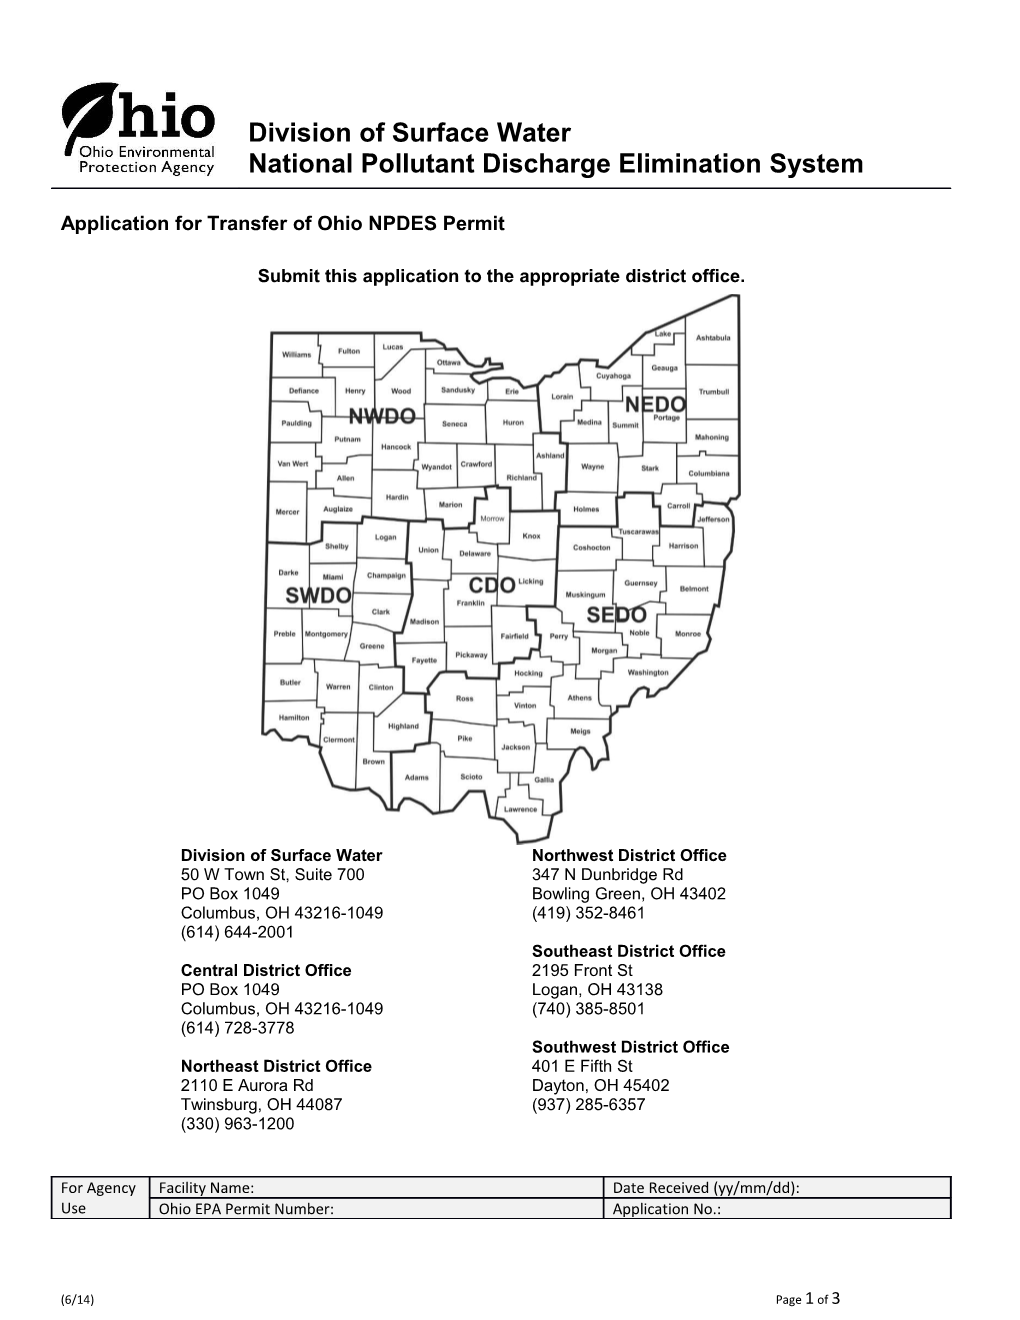 Application for Transfer of Ohio NPDES Permit